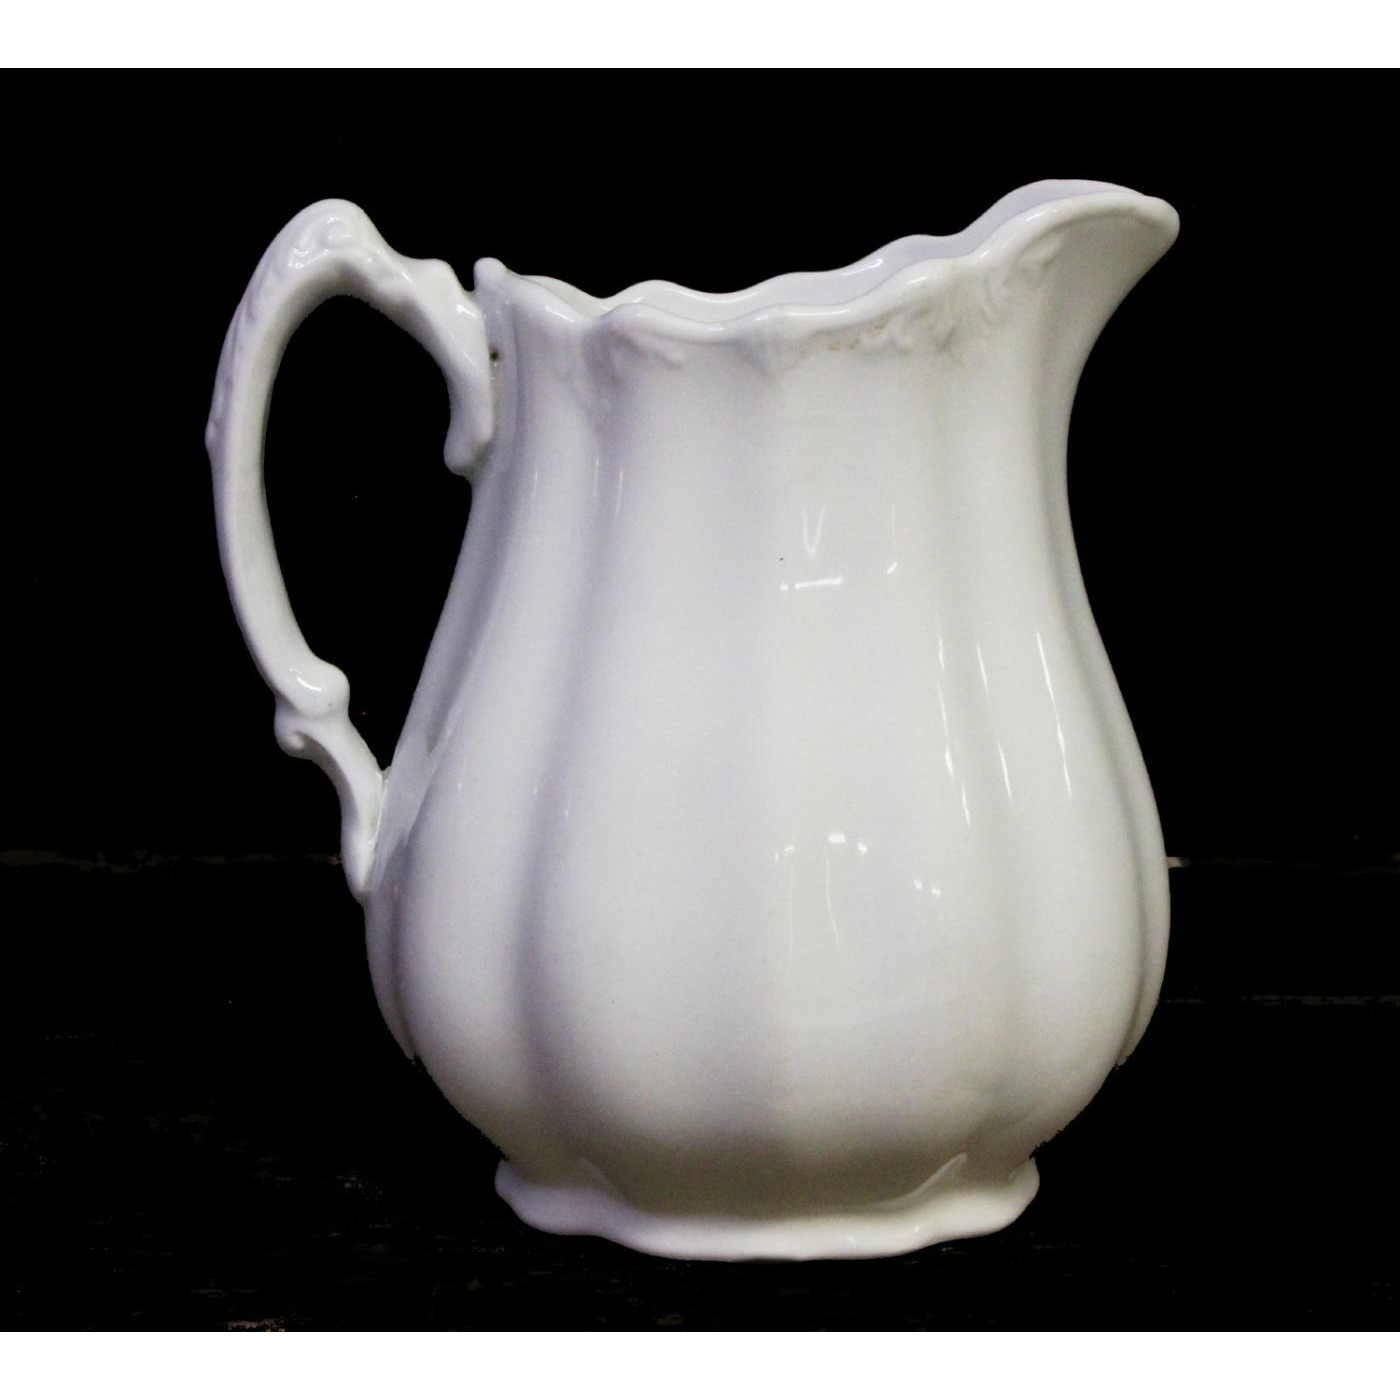 Sweet Pleated or Fluted "Tracery" Ironstone Creamer